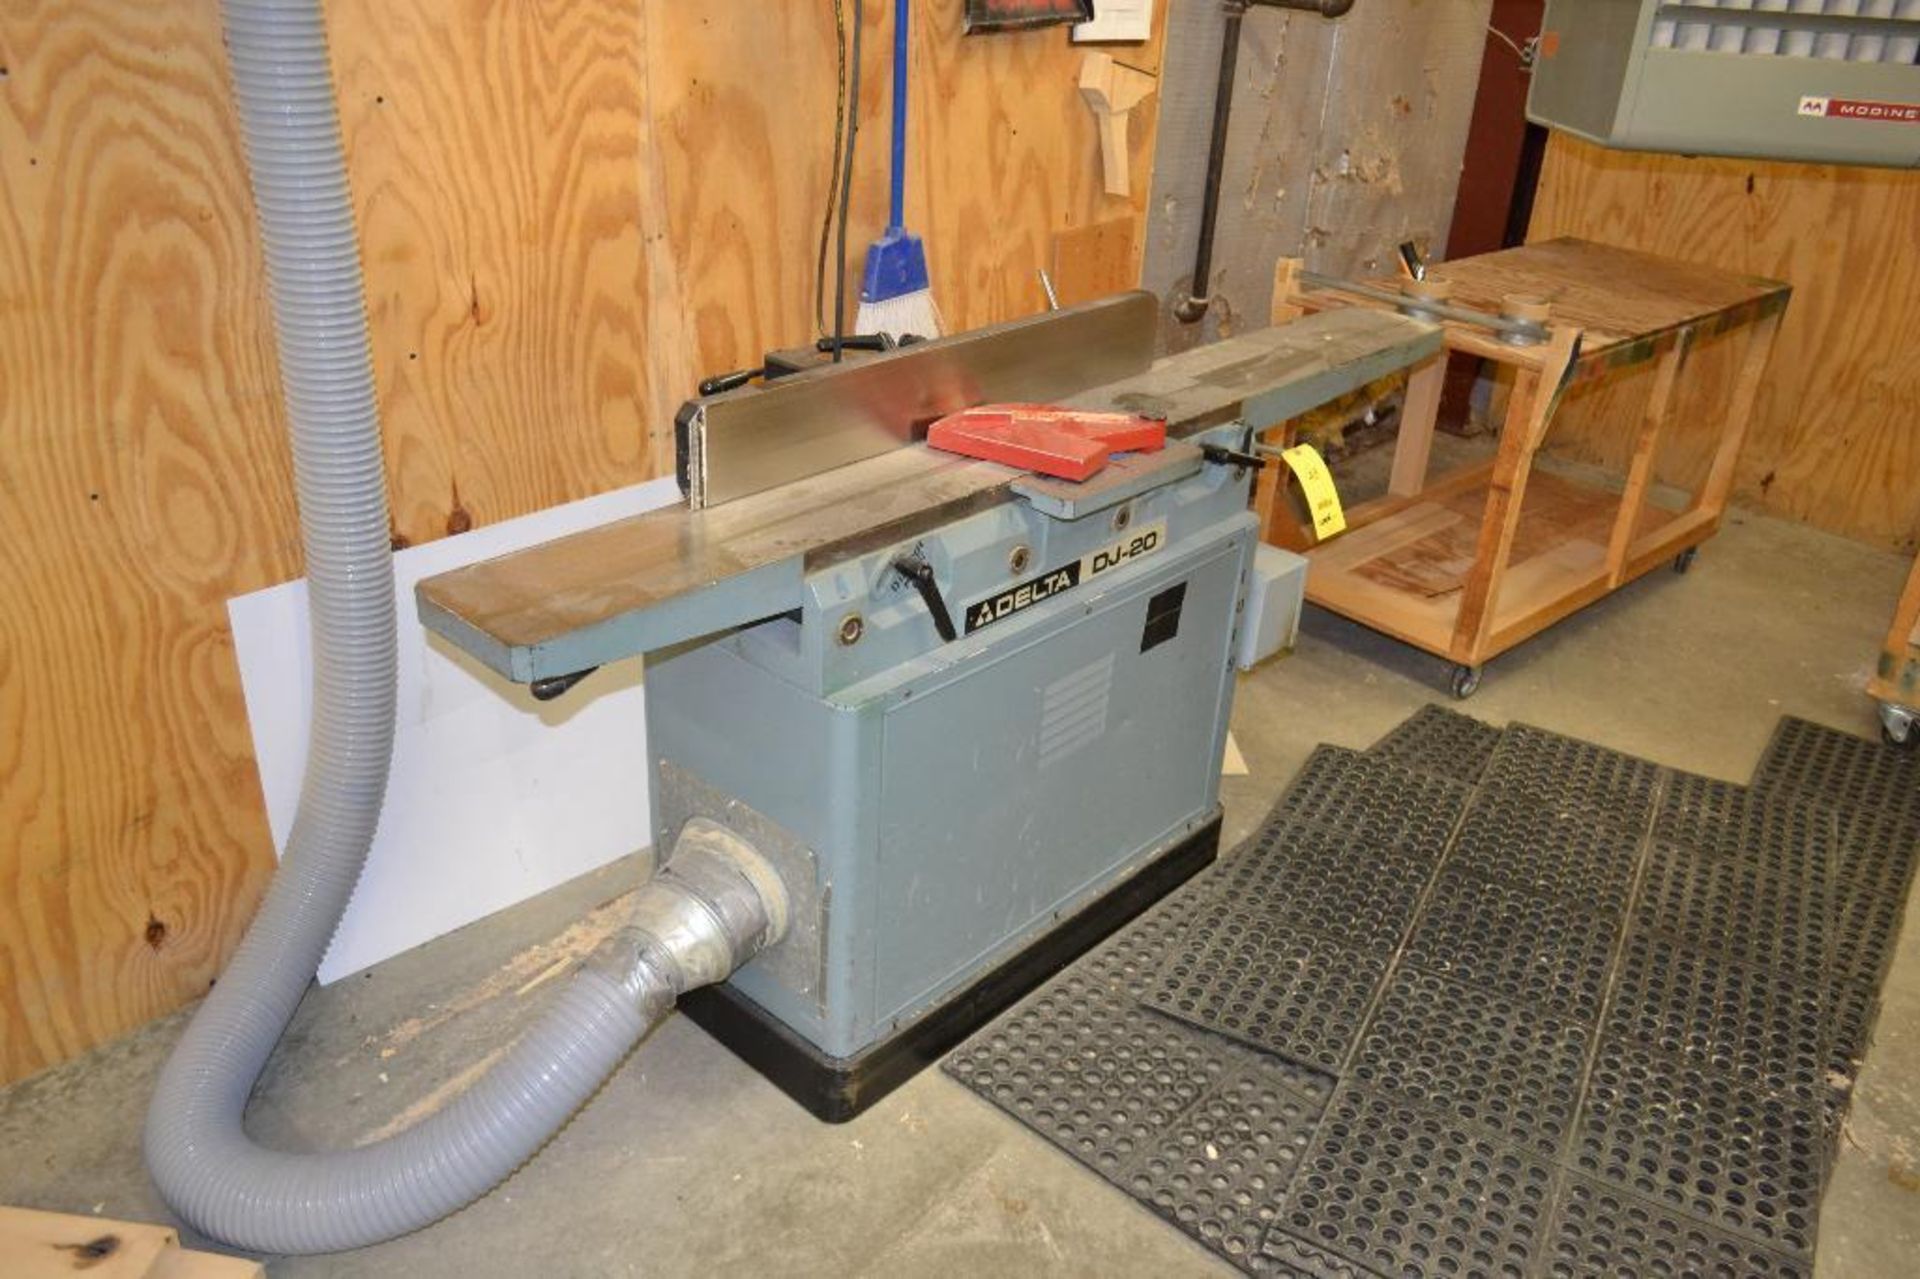 Delta 8 in. Round Head Jointer Model DJ-20, S/N 93D-11014, 8 in. x 77 in. Work Table - Image 2 of 2